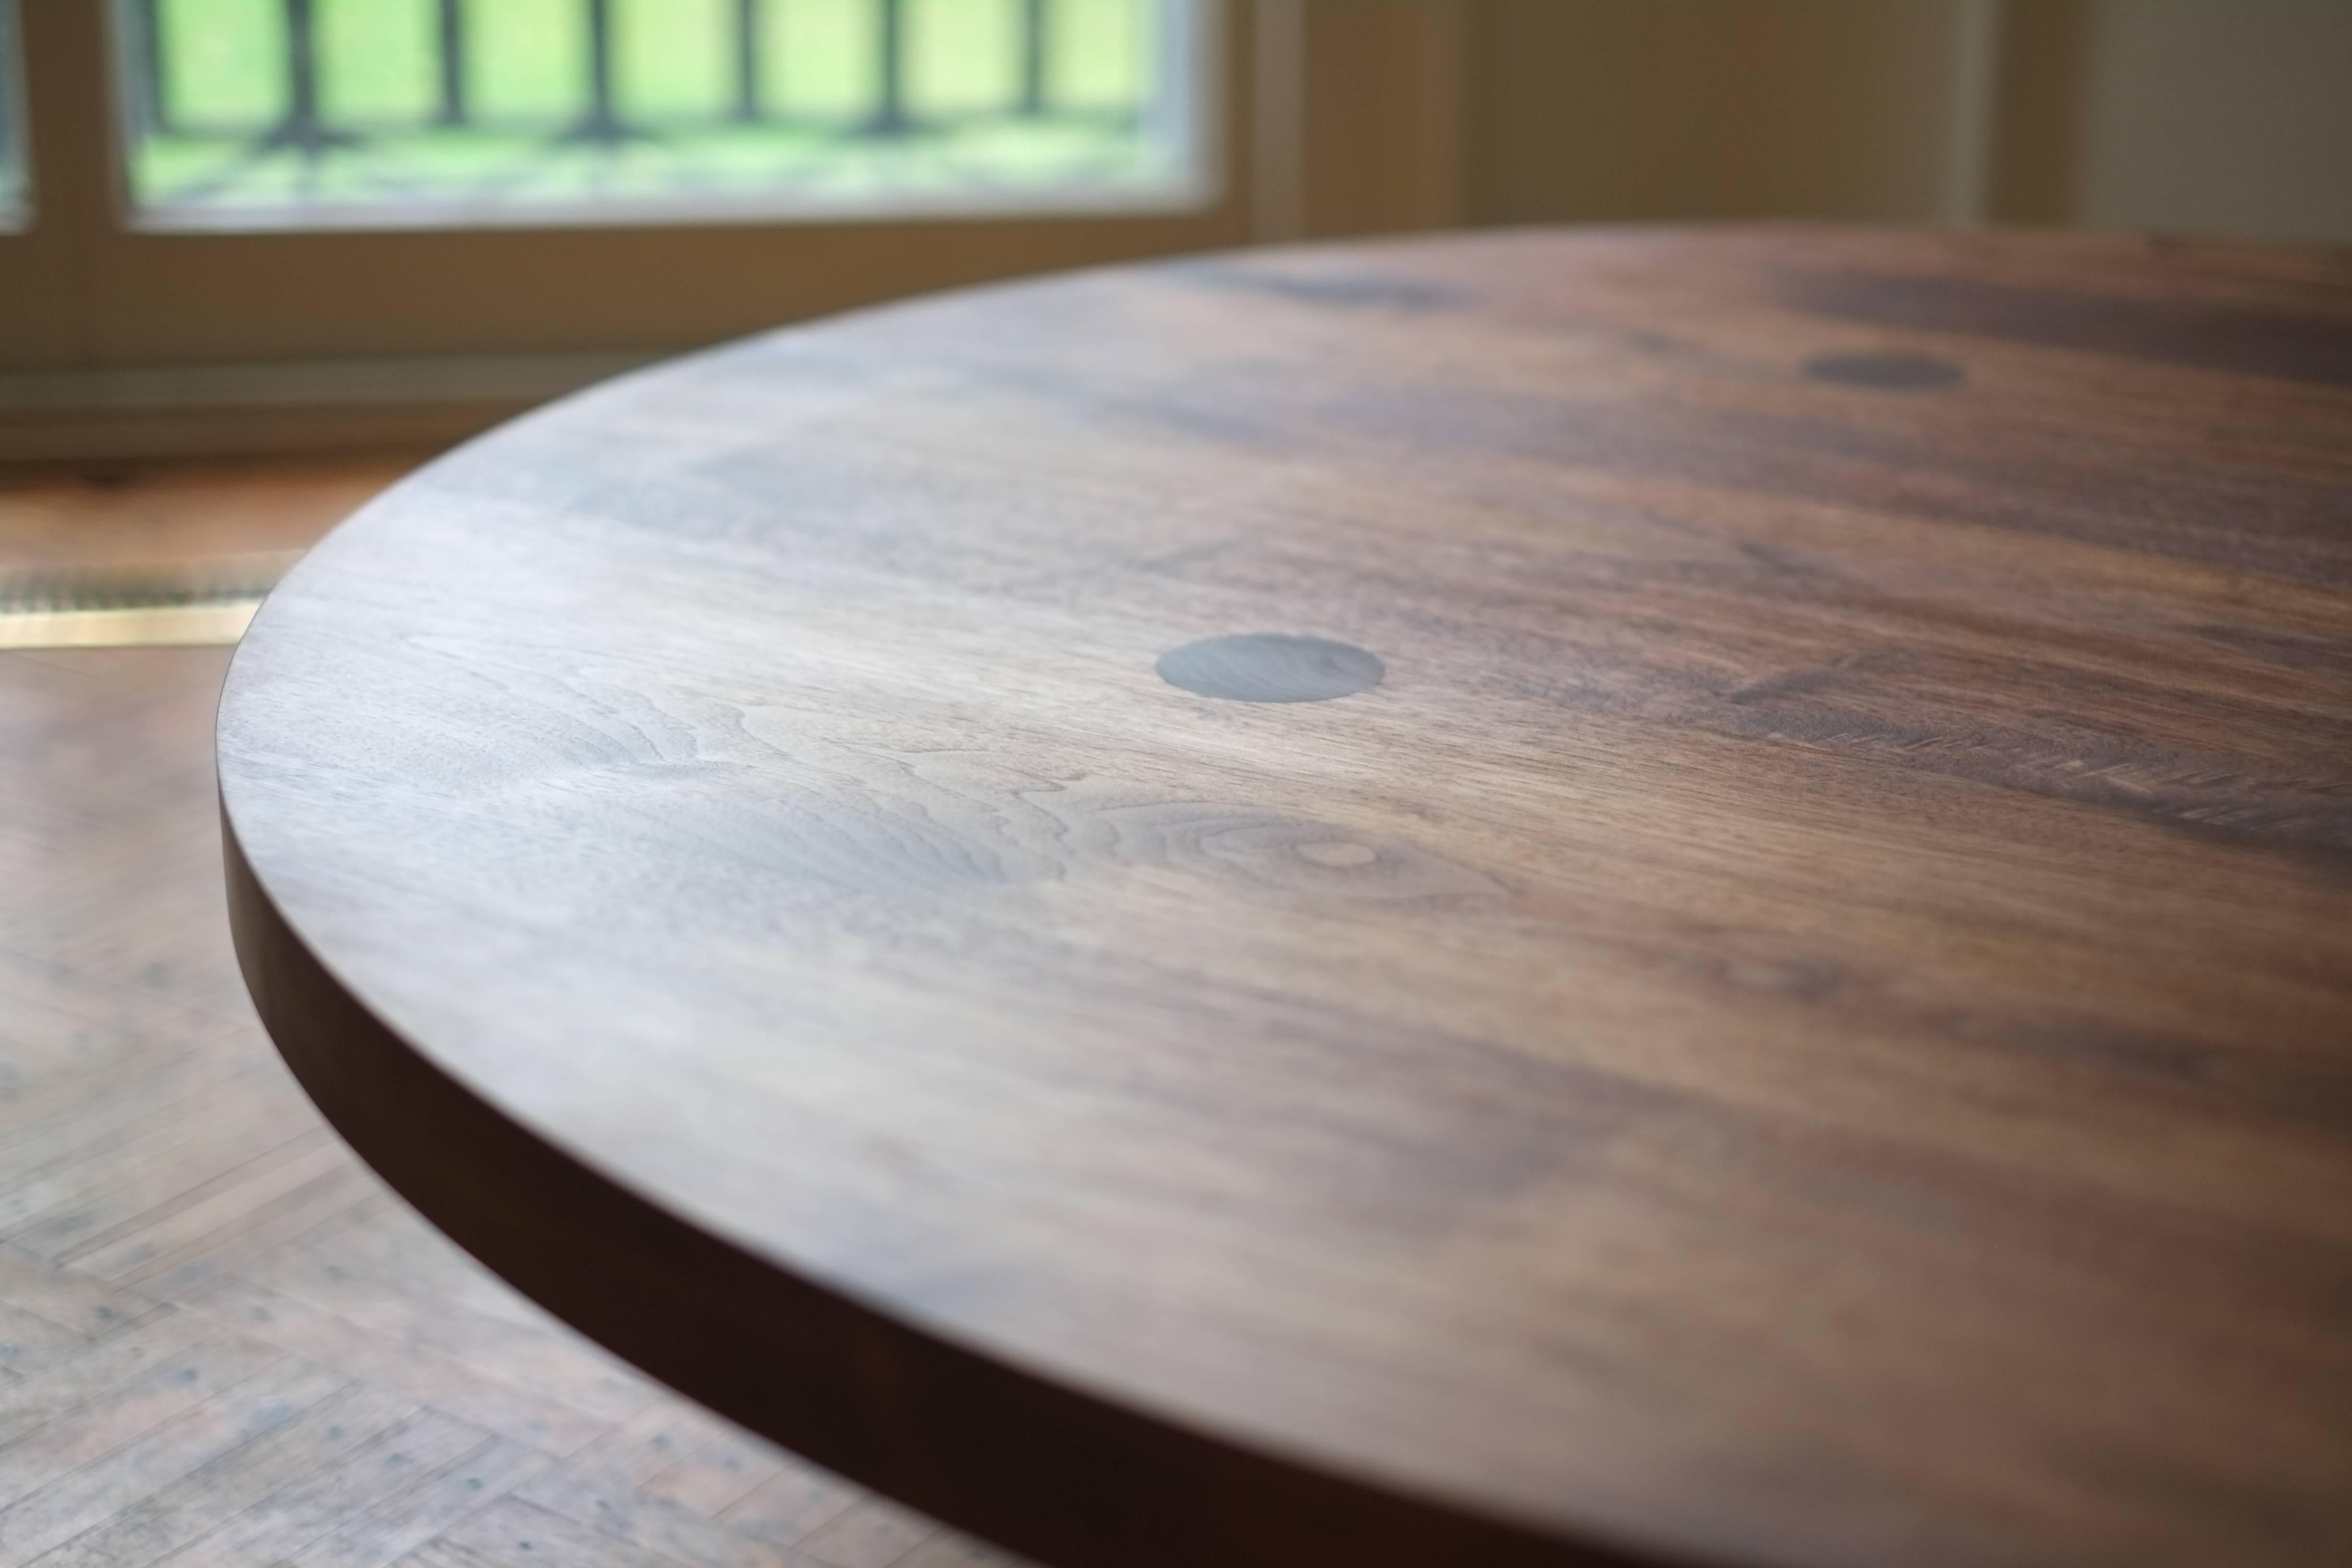 This contemporary, minimal wooden coffee table features four large round legs that pierce the 2 inch thick top to reveal the joinery and remove the need for any other structural components. This detail communicates its solid construction, while